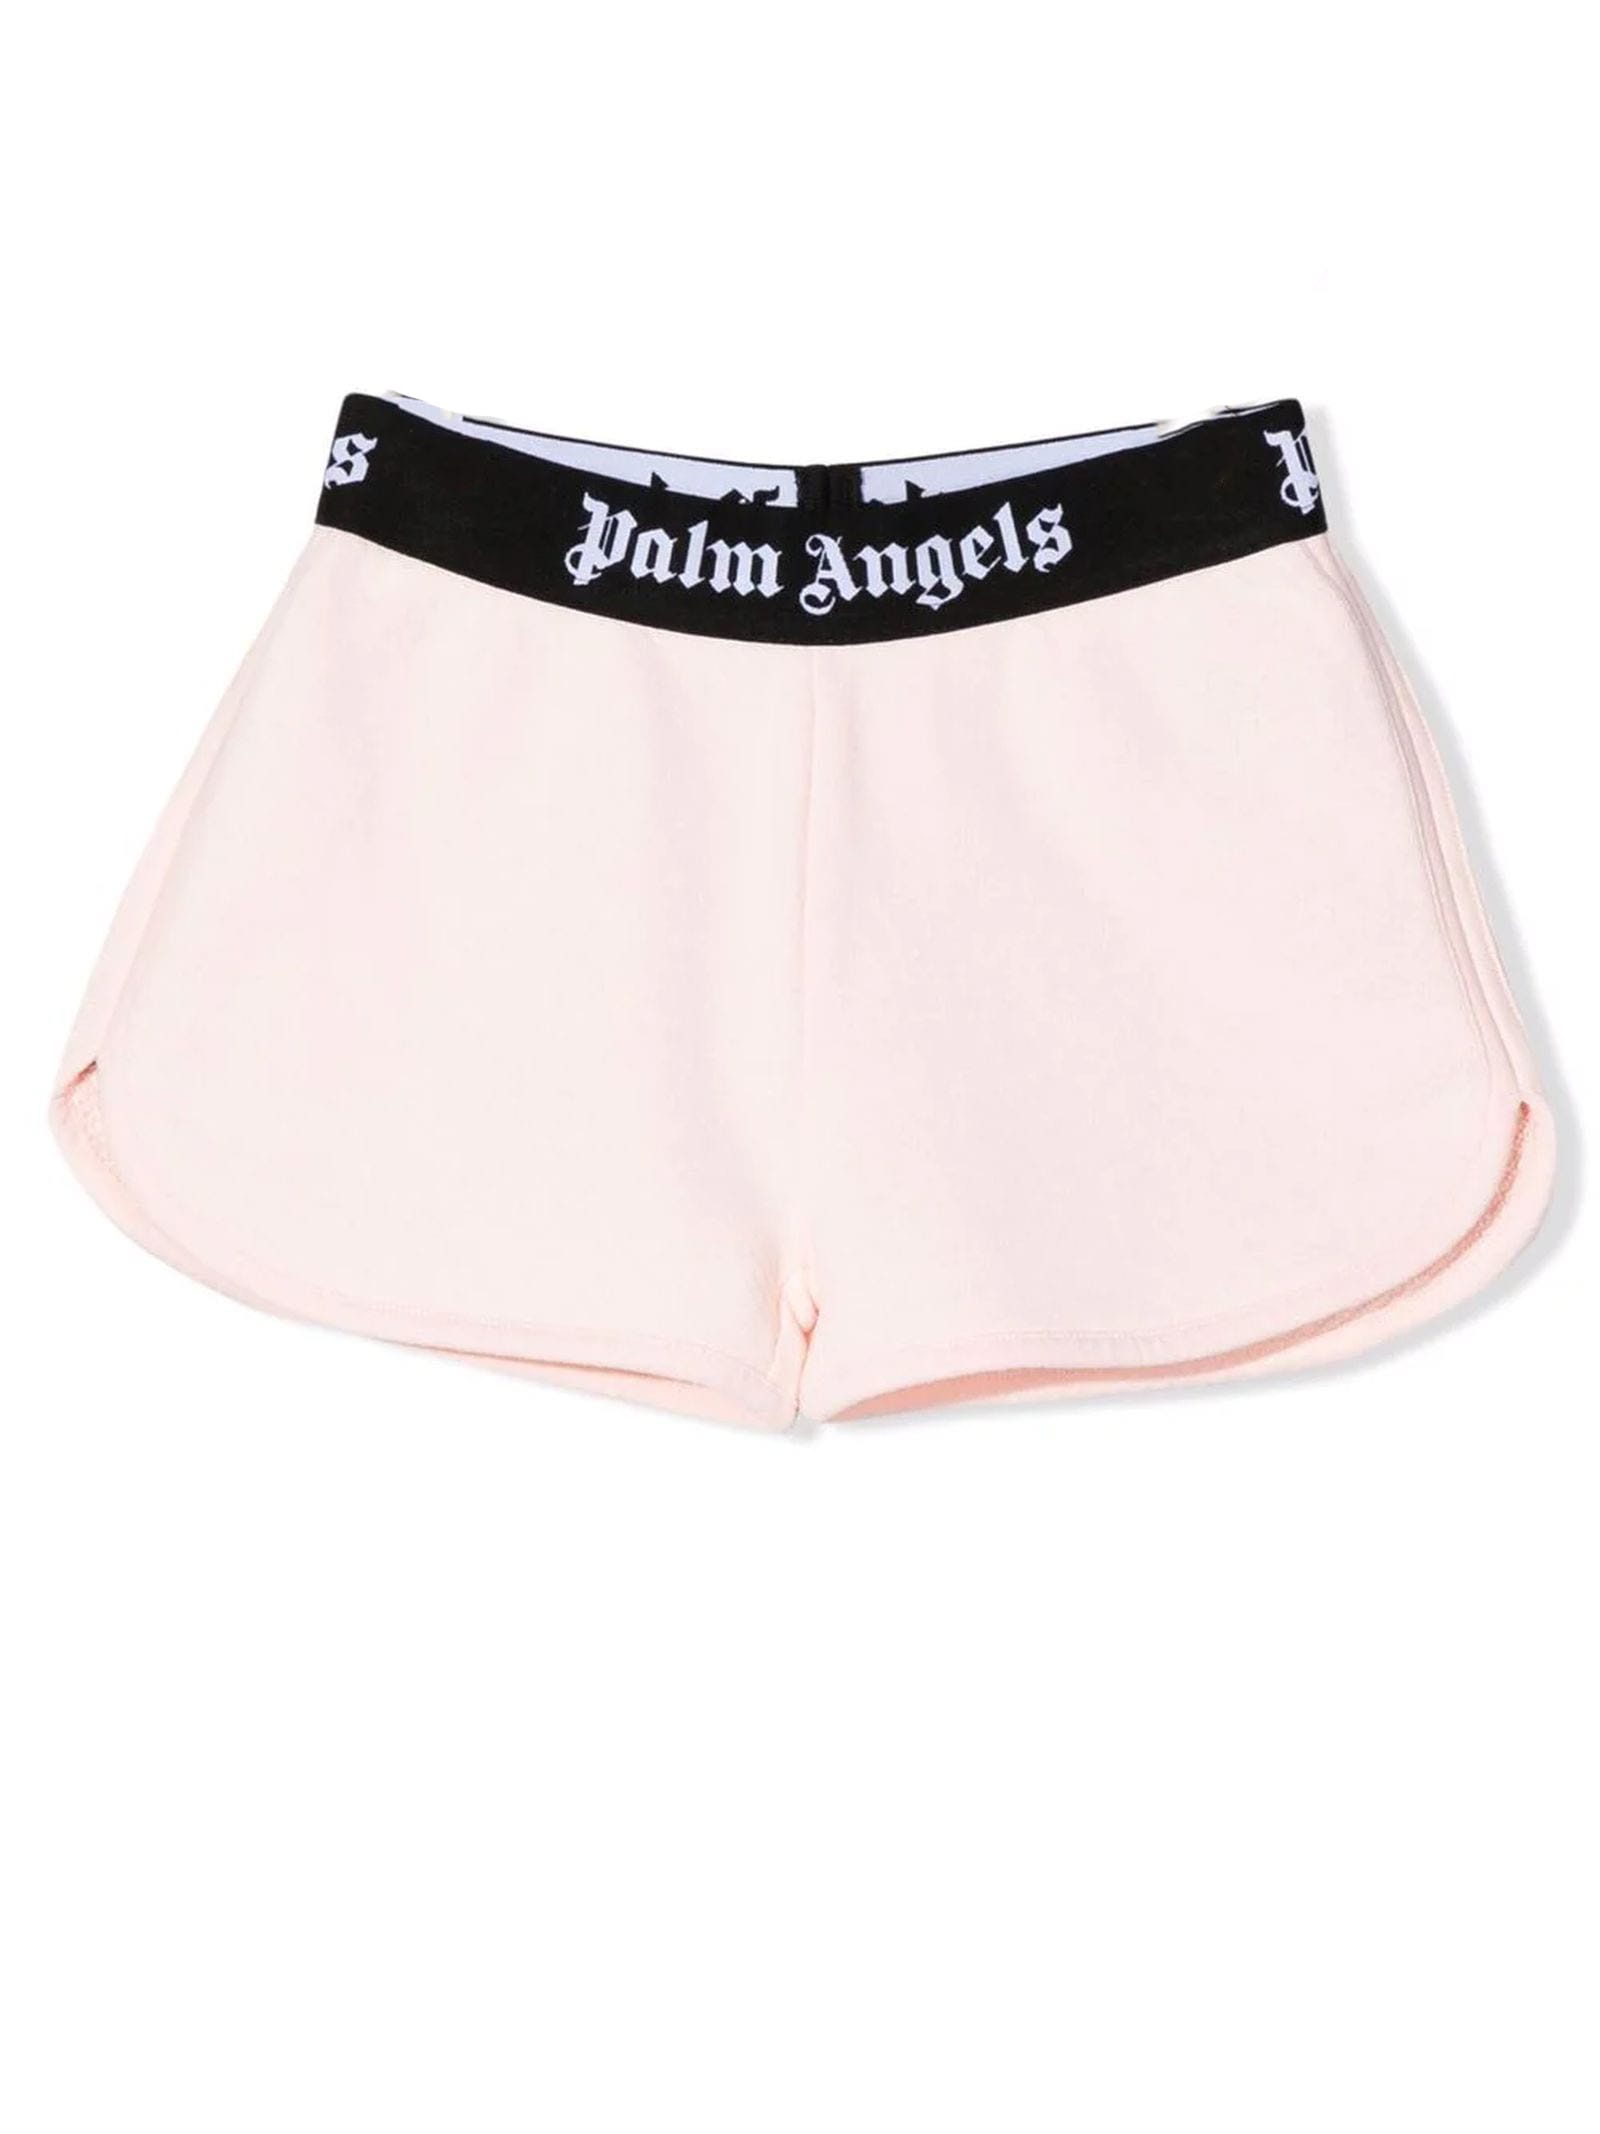 Palm Angels Pink Cotton Shorts